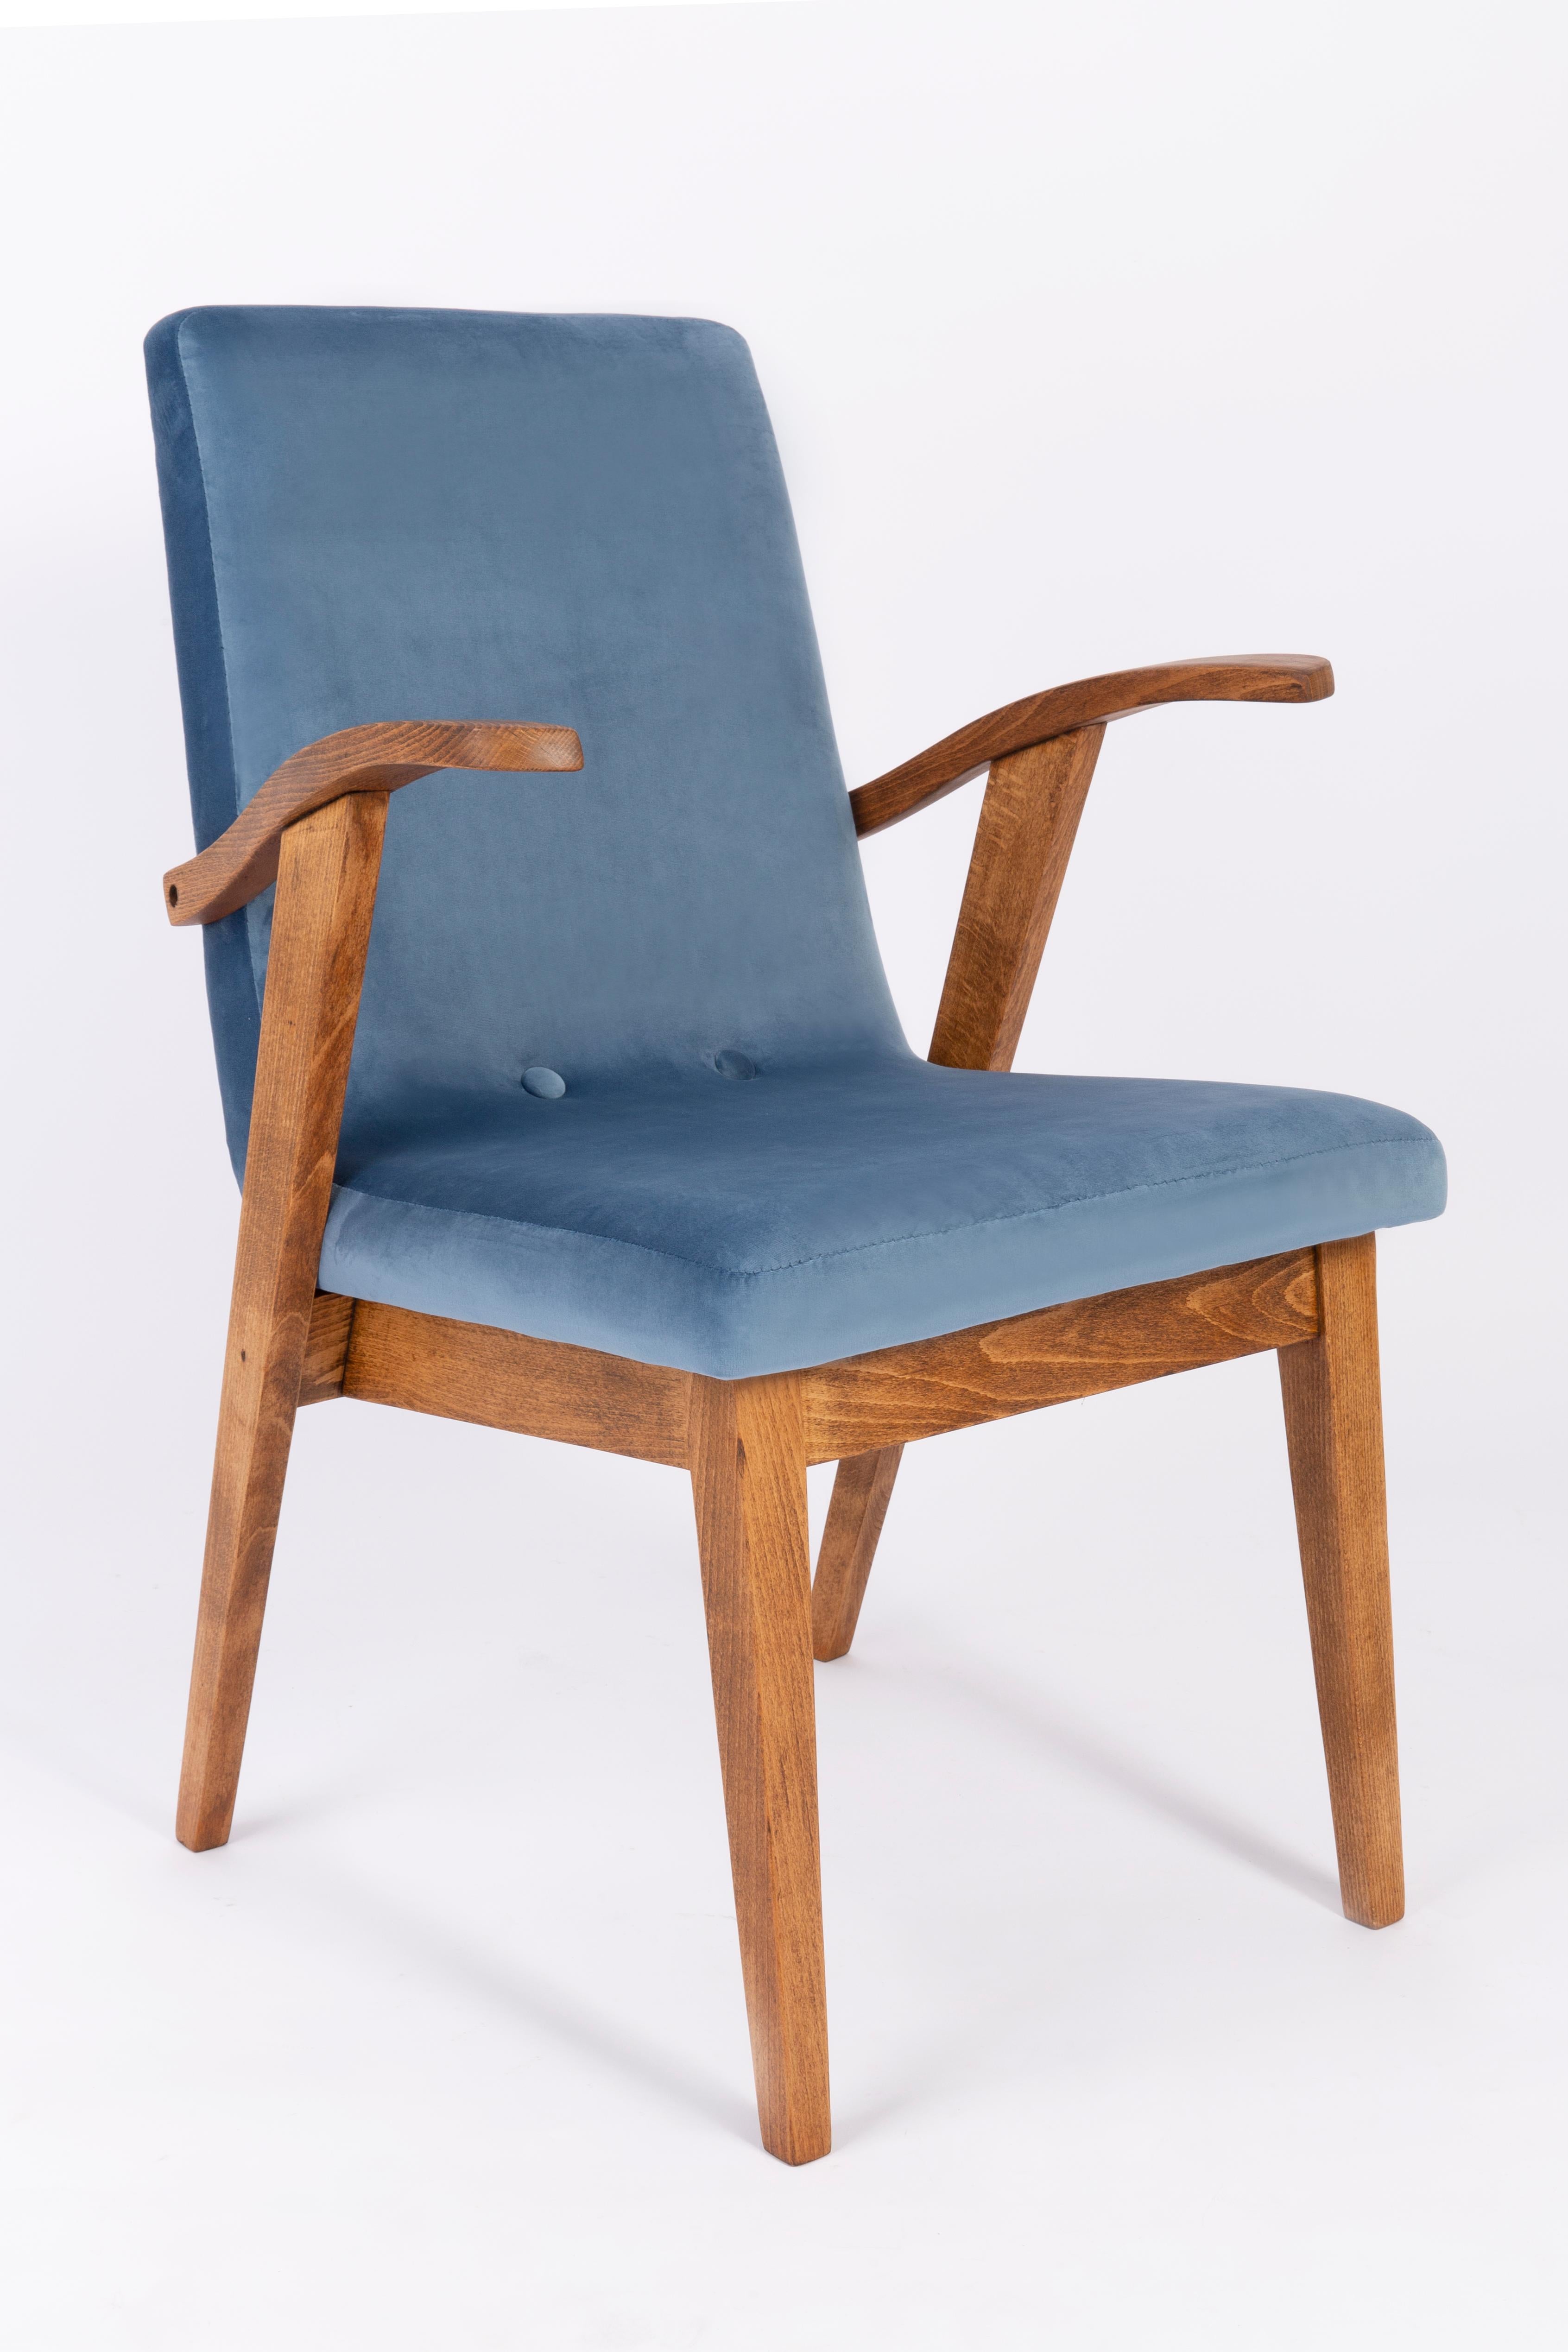 Chairs designed by Mieczyslaw Puchala in a Classic edition. Medium brown wood combined with a gray blue (color 2233) fabric gives it elegance and nobility. The chairs has undergone a full carpentry and upholstery renovation. The wood is in excellent